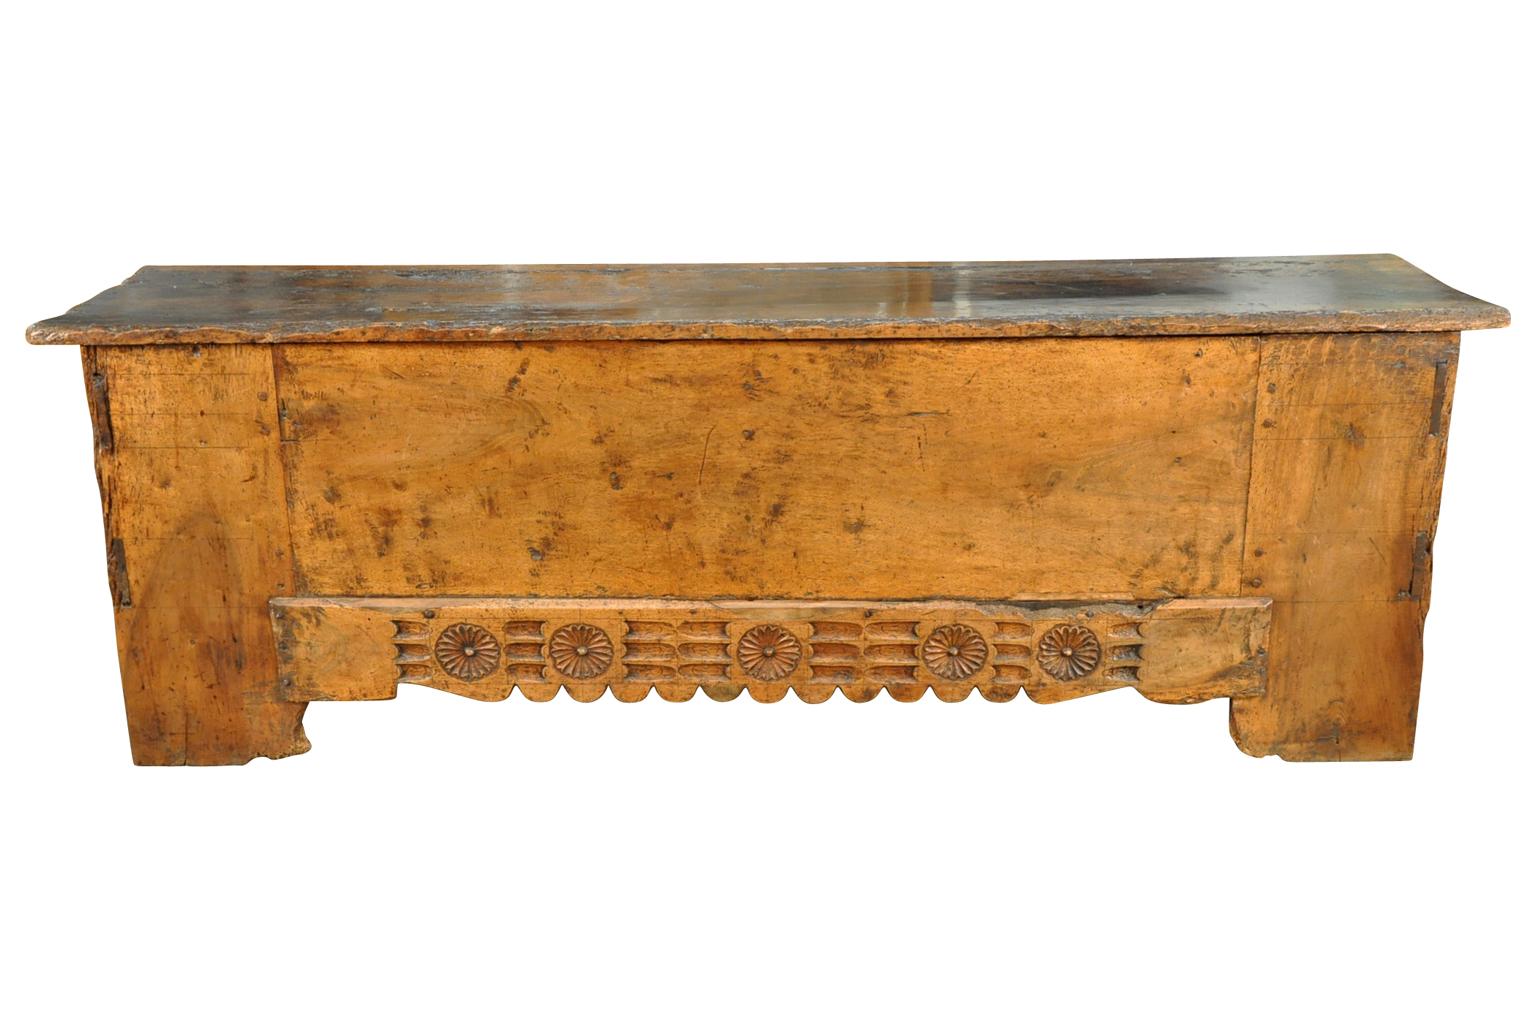 A truly exceptional and grand scale 17th century coffre - trunk from Queyras - located in the French Hautes-Alpes. Wonderfully constructed from beautifull walnut with solid boards and delightful carving to the skirt. Sensational patina.